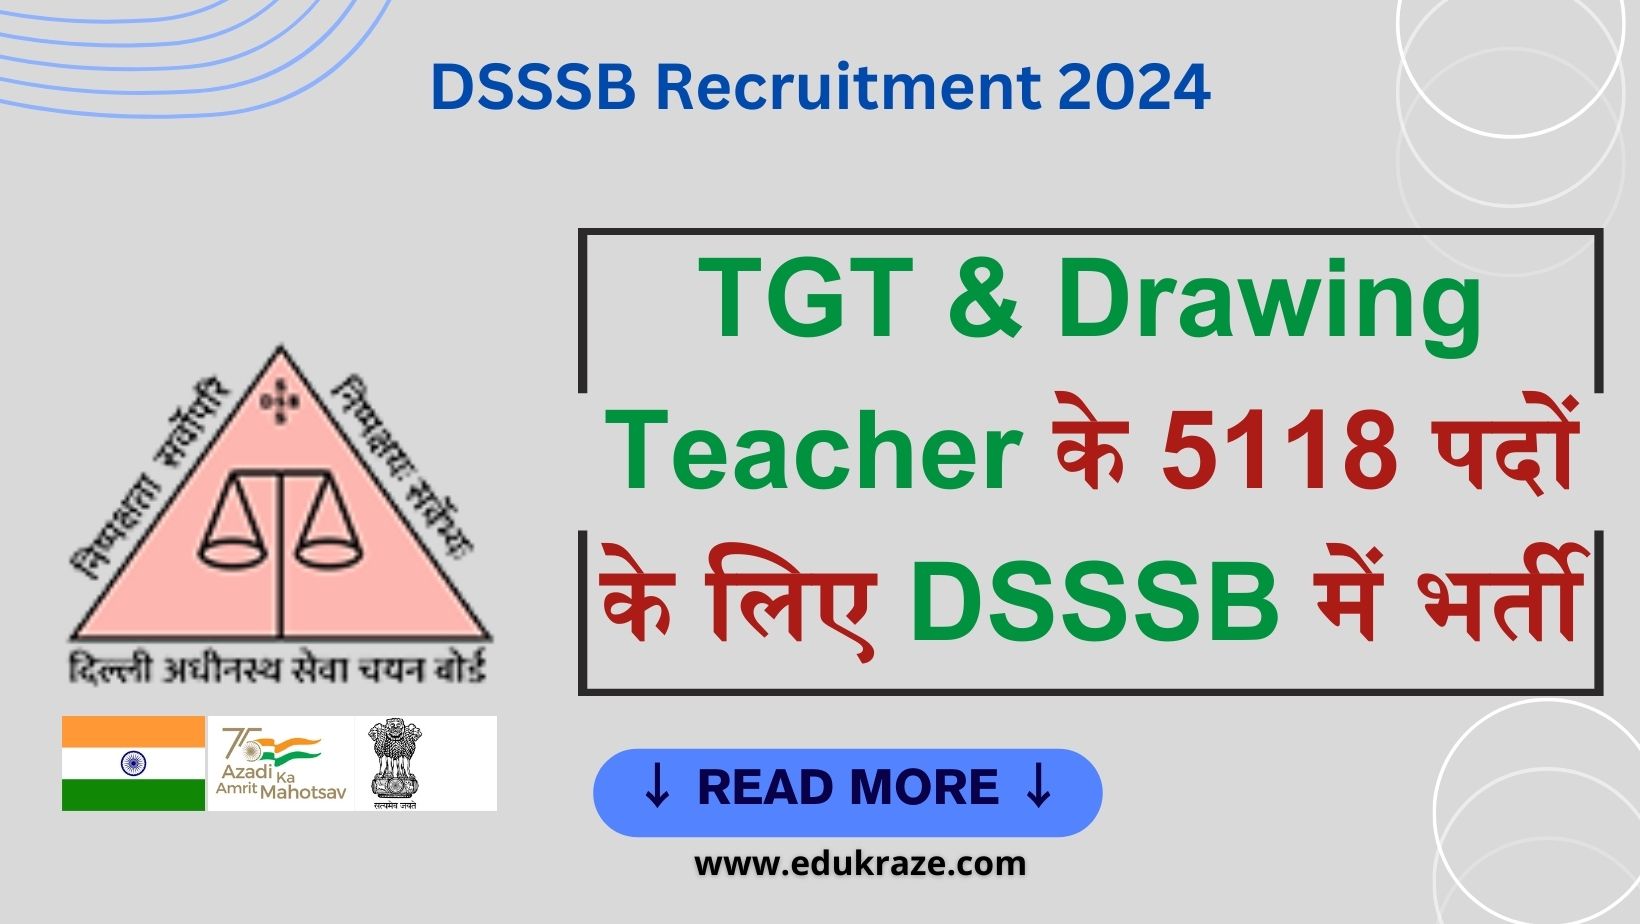 You are currently viewing TGT & Drawing Teacher Recruitment Out at DSSSB | 5118 Vacancies